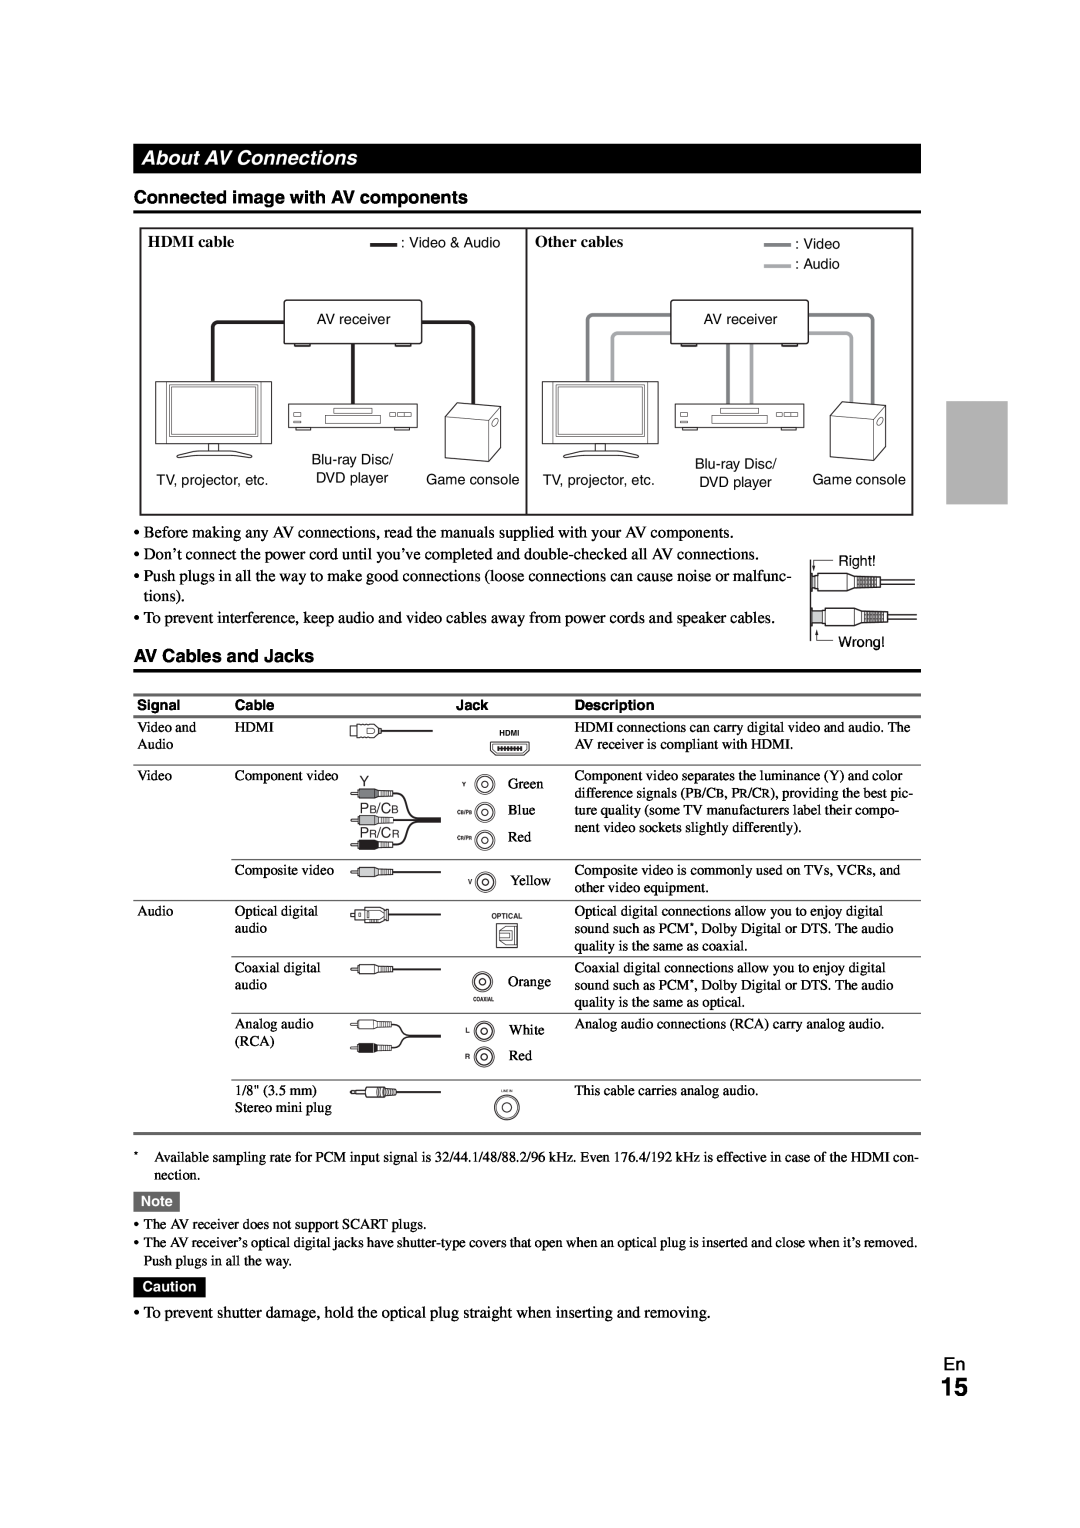 Onkyo HT-S5300 instruction manual About AV Connections, Connected image with AV components, AV Cables and Jacks 